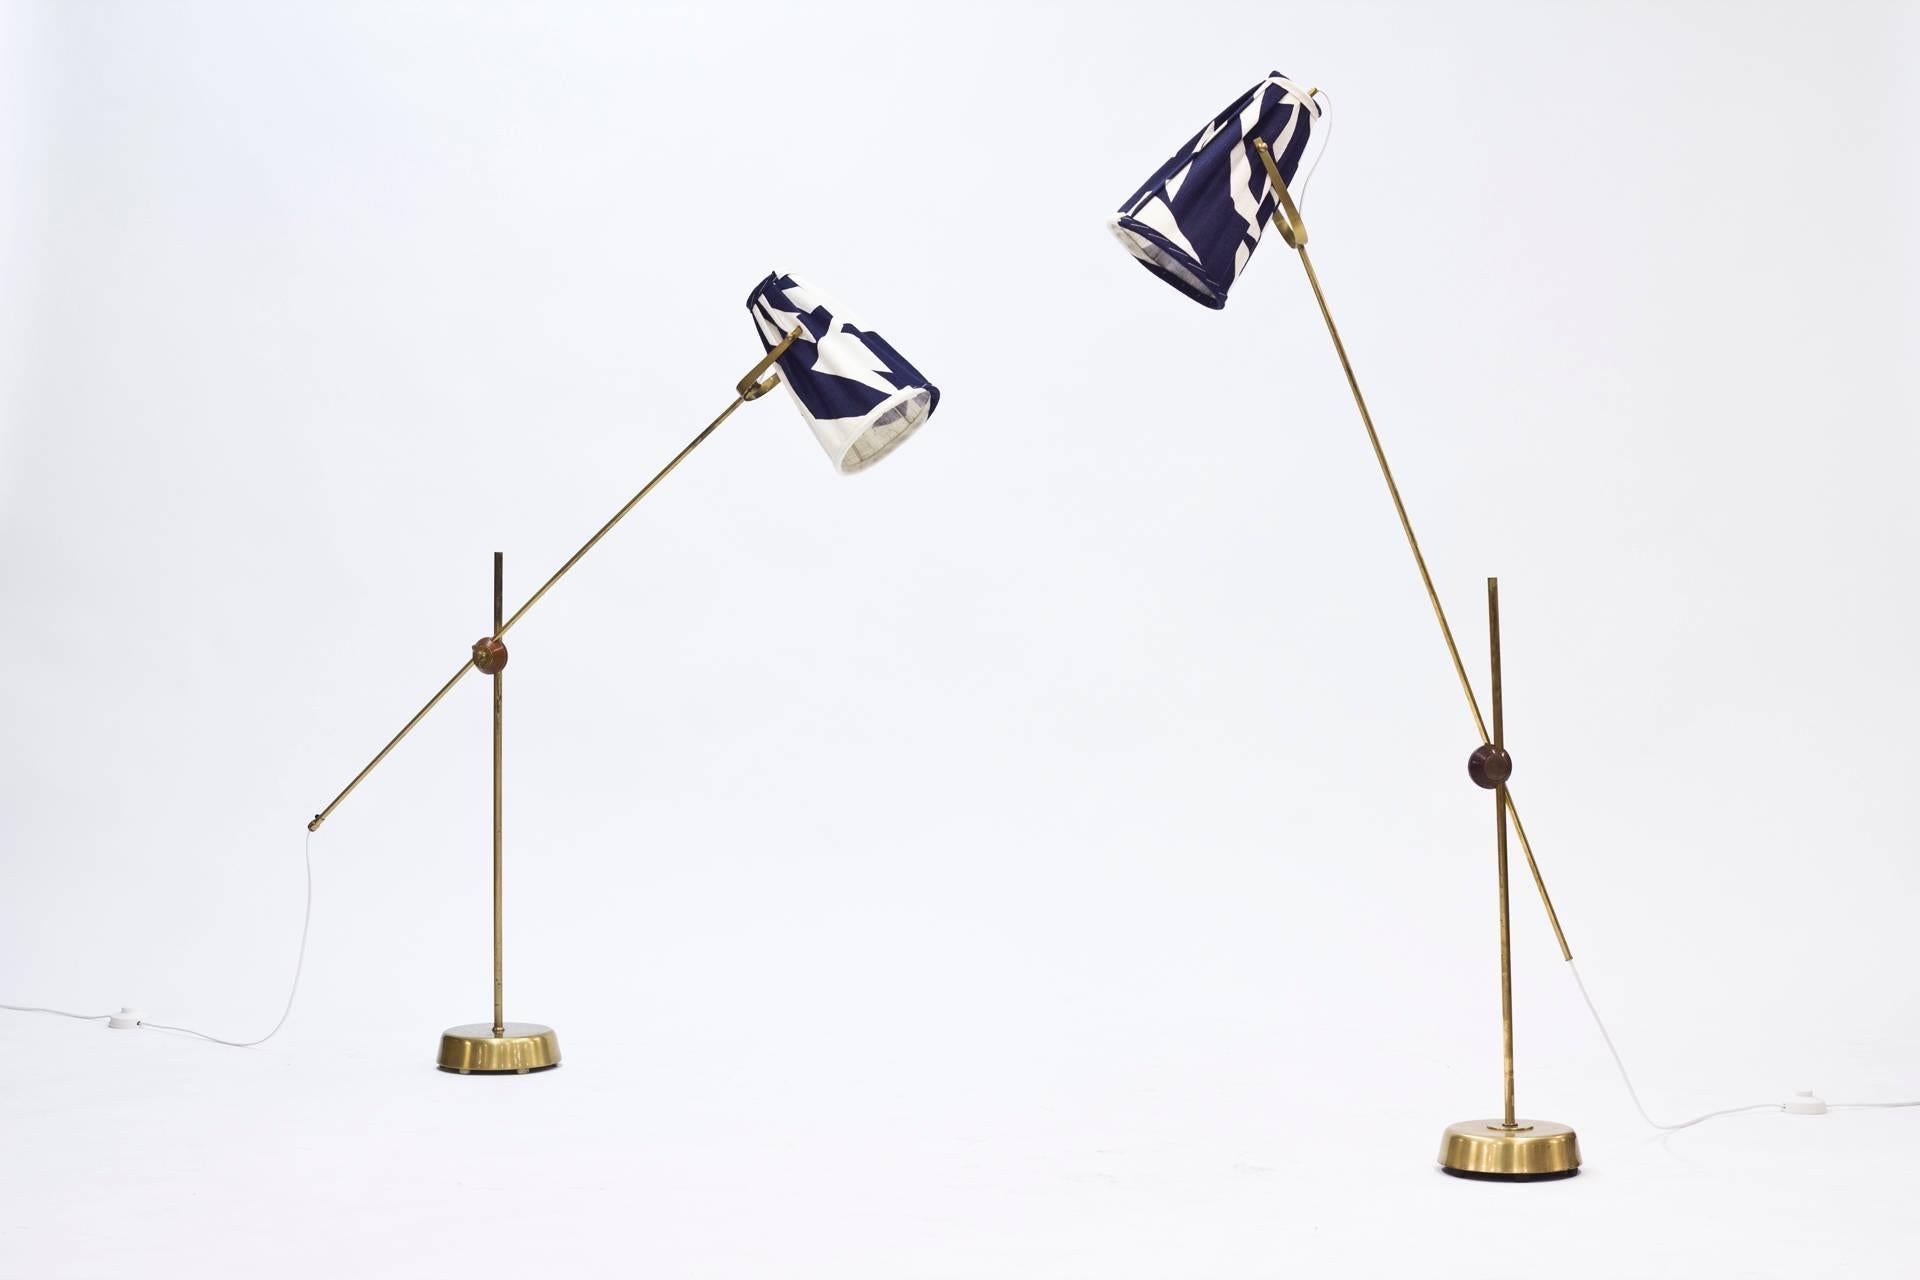 Awesome pair of floor lamps by Hans Bergström for Ateljé Lyktan. Combine the light, graphic lines typical of 1950s designs with the luxury and solidity of the brass. Can be extended and twisted into various heights and positions and the shades can